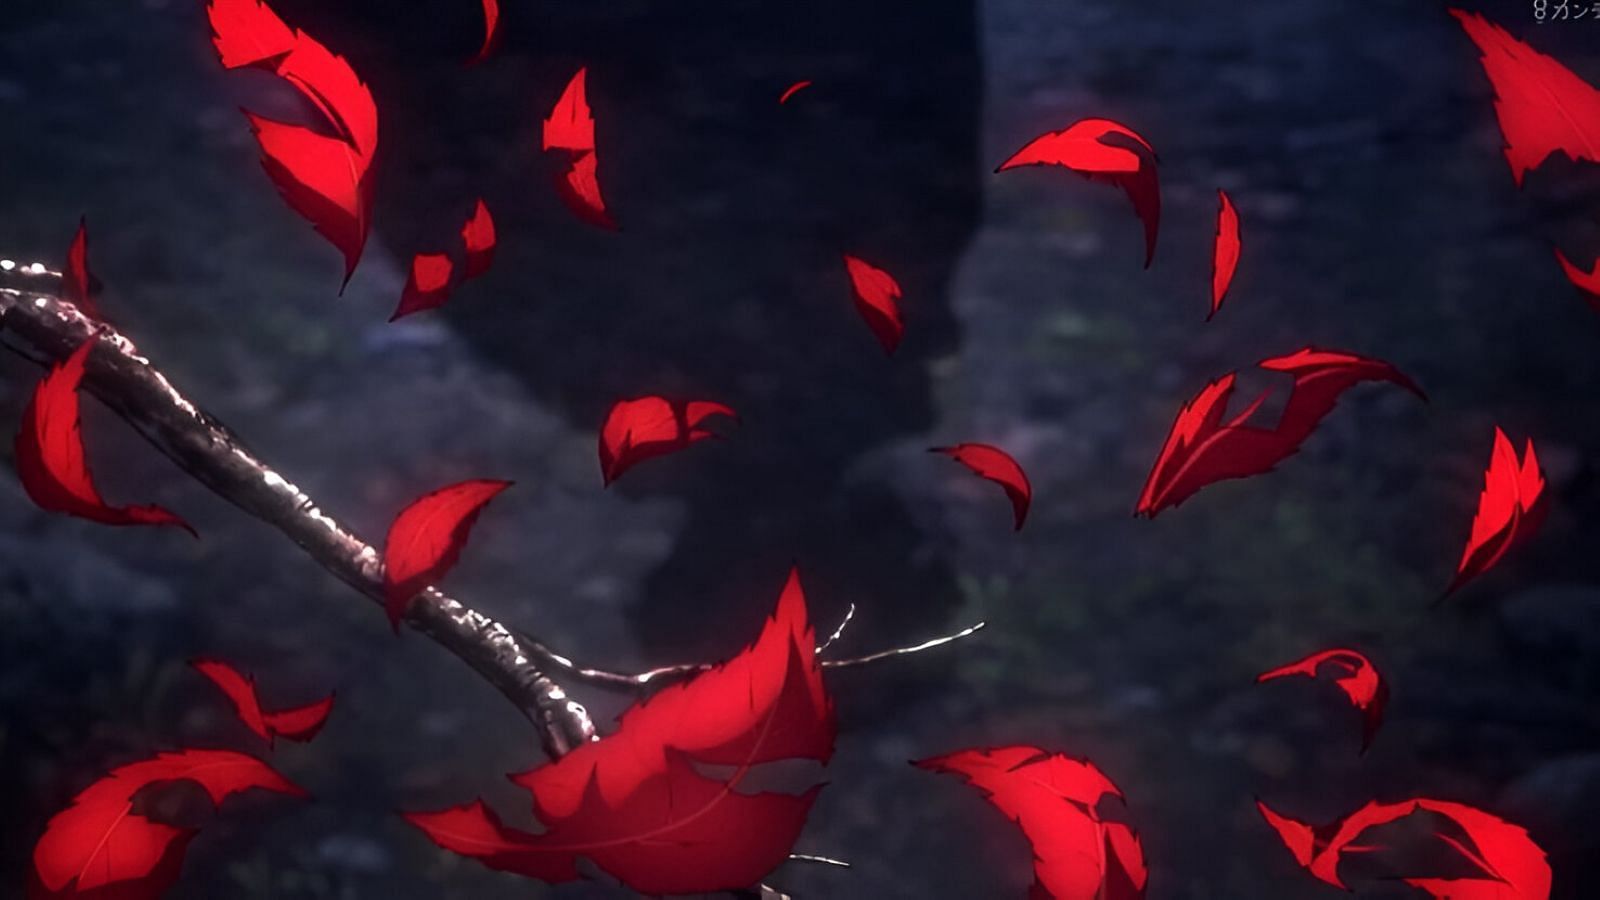 Flowers wither away when Muzan walks by, which can be seen in the Demon Slayer season 4 ending (Image via Ufotable)